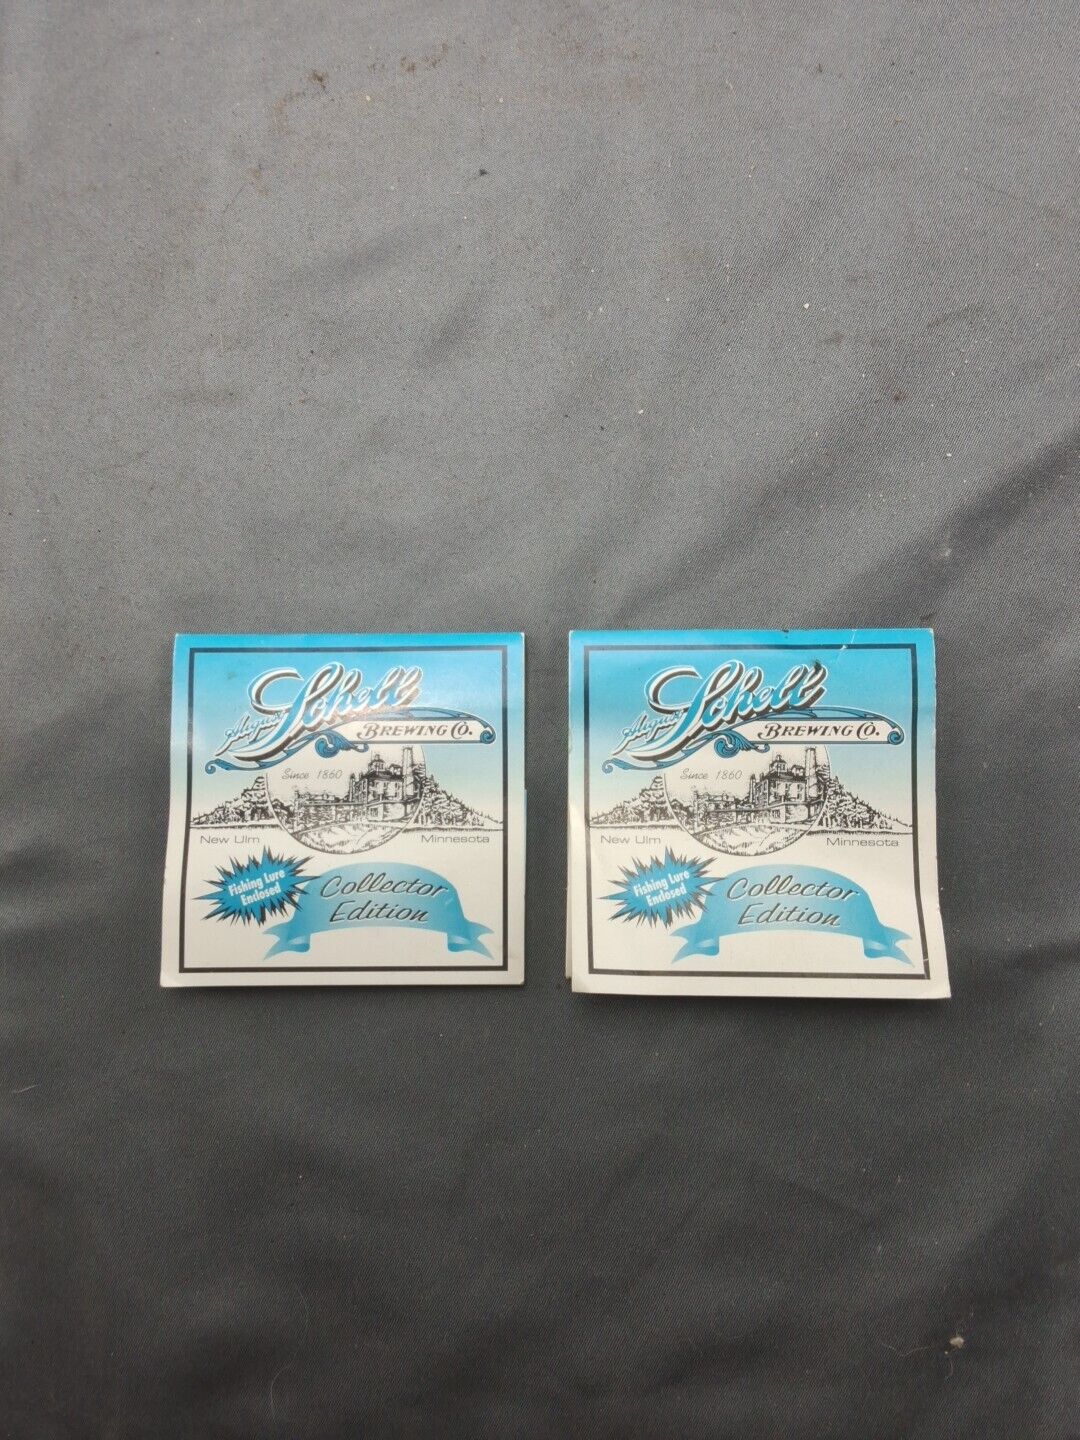 2 SCHELL\'S Beer Fishing Lures ~ New Ulm, MN SCHELL\'S Brewery 1990\'s